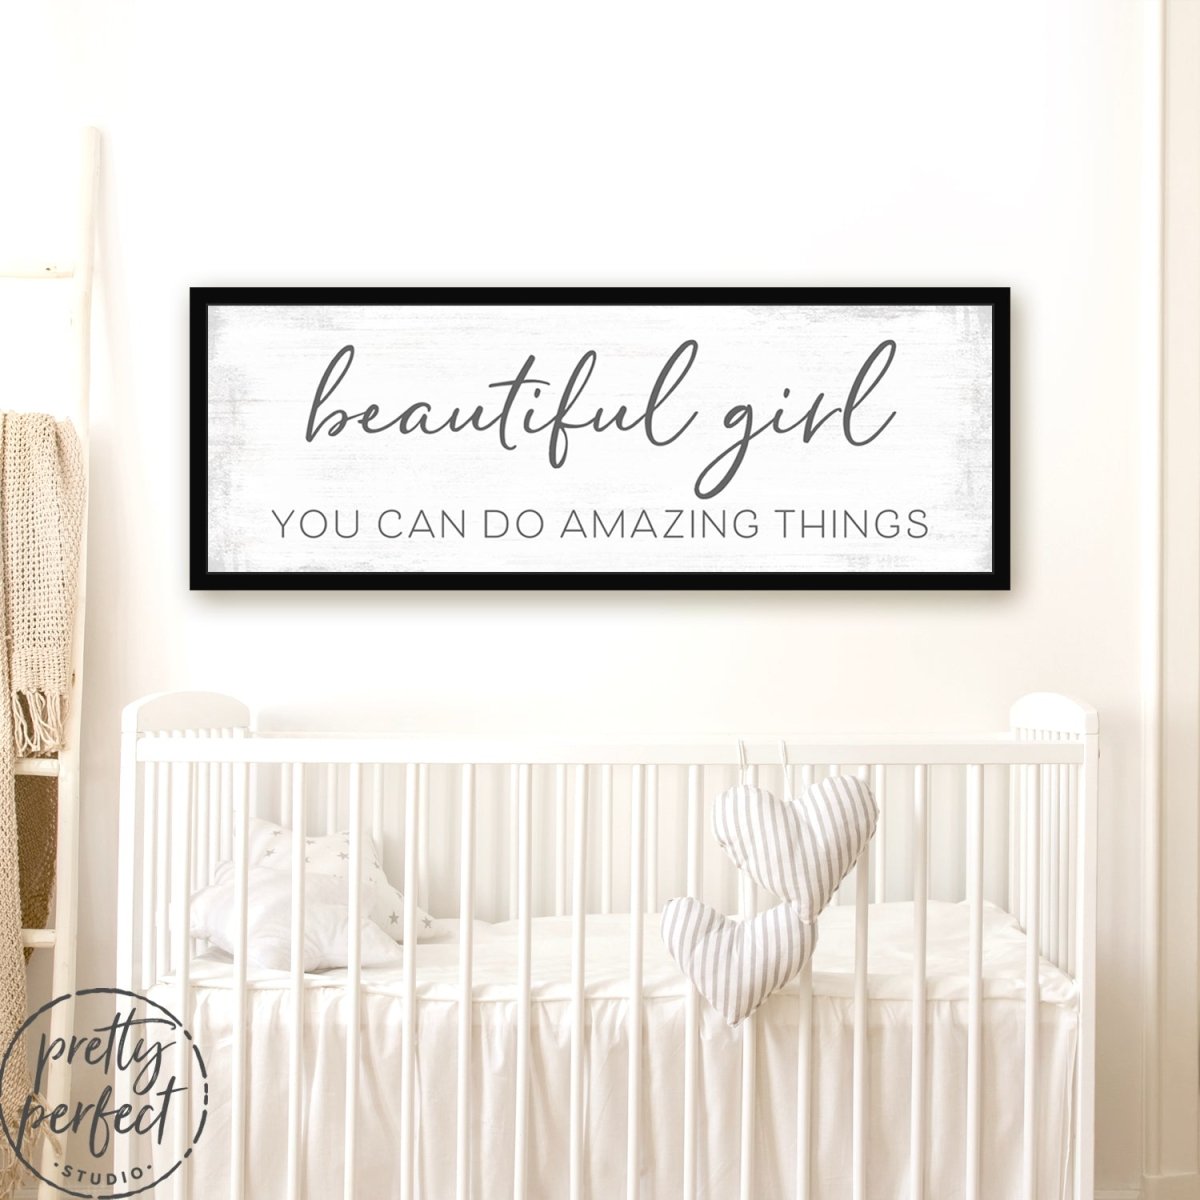 Beautiful Girl You Can Do Amazing Things Wall Art For Nursery Over Baby Crib - Pretty Perfect Studio